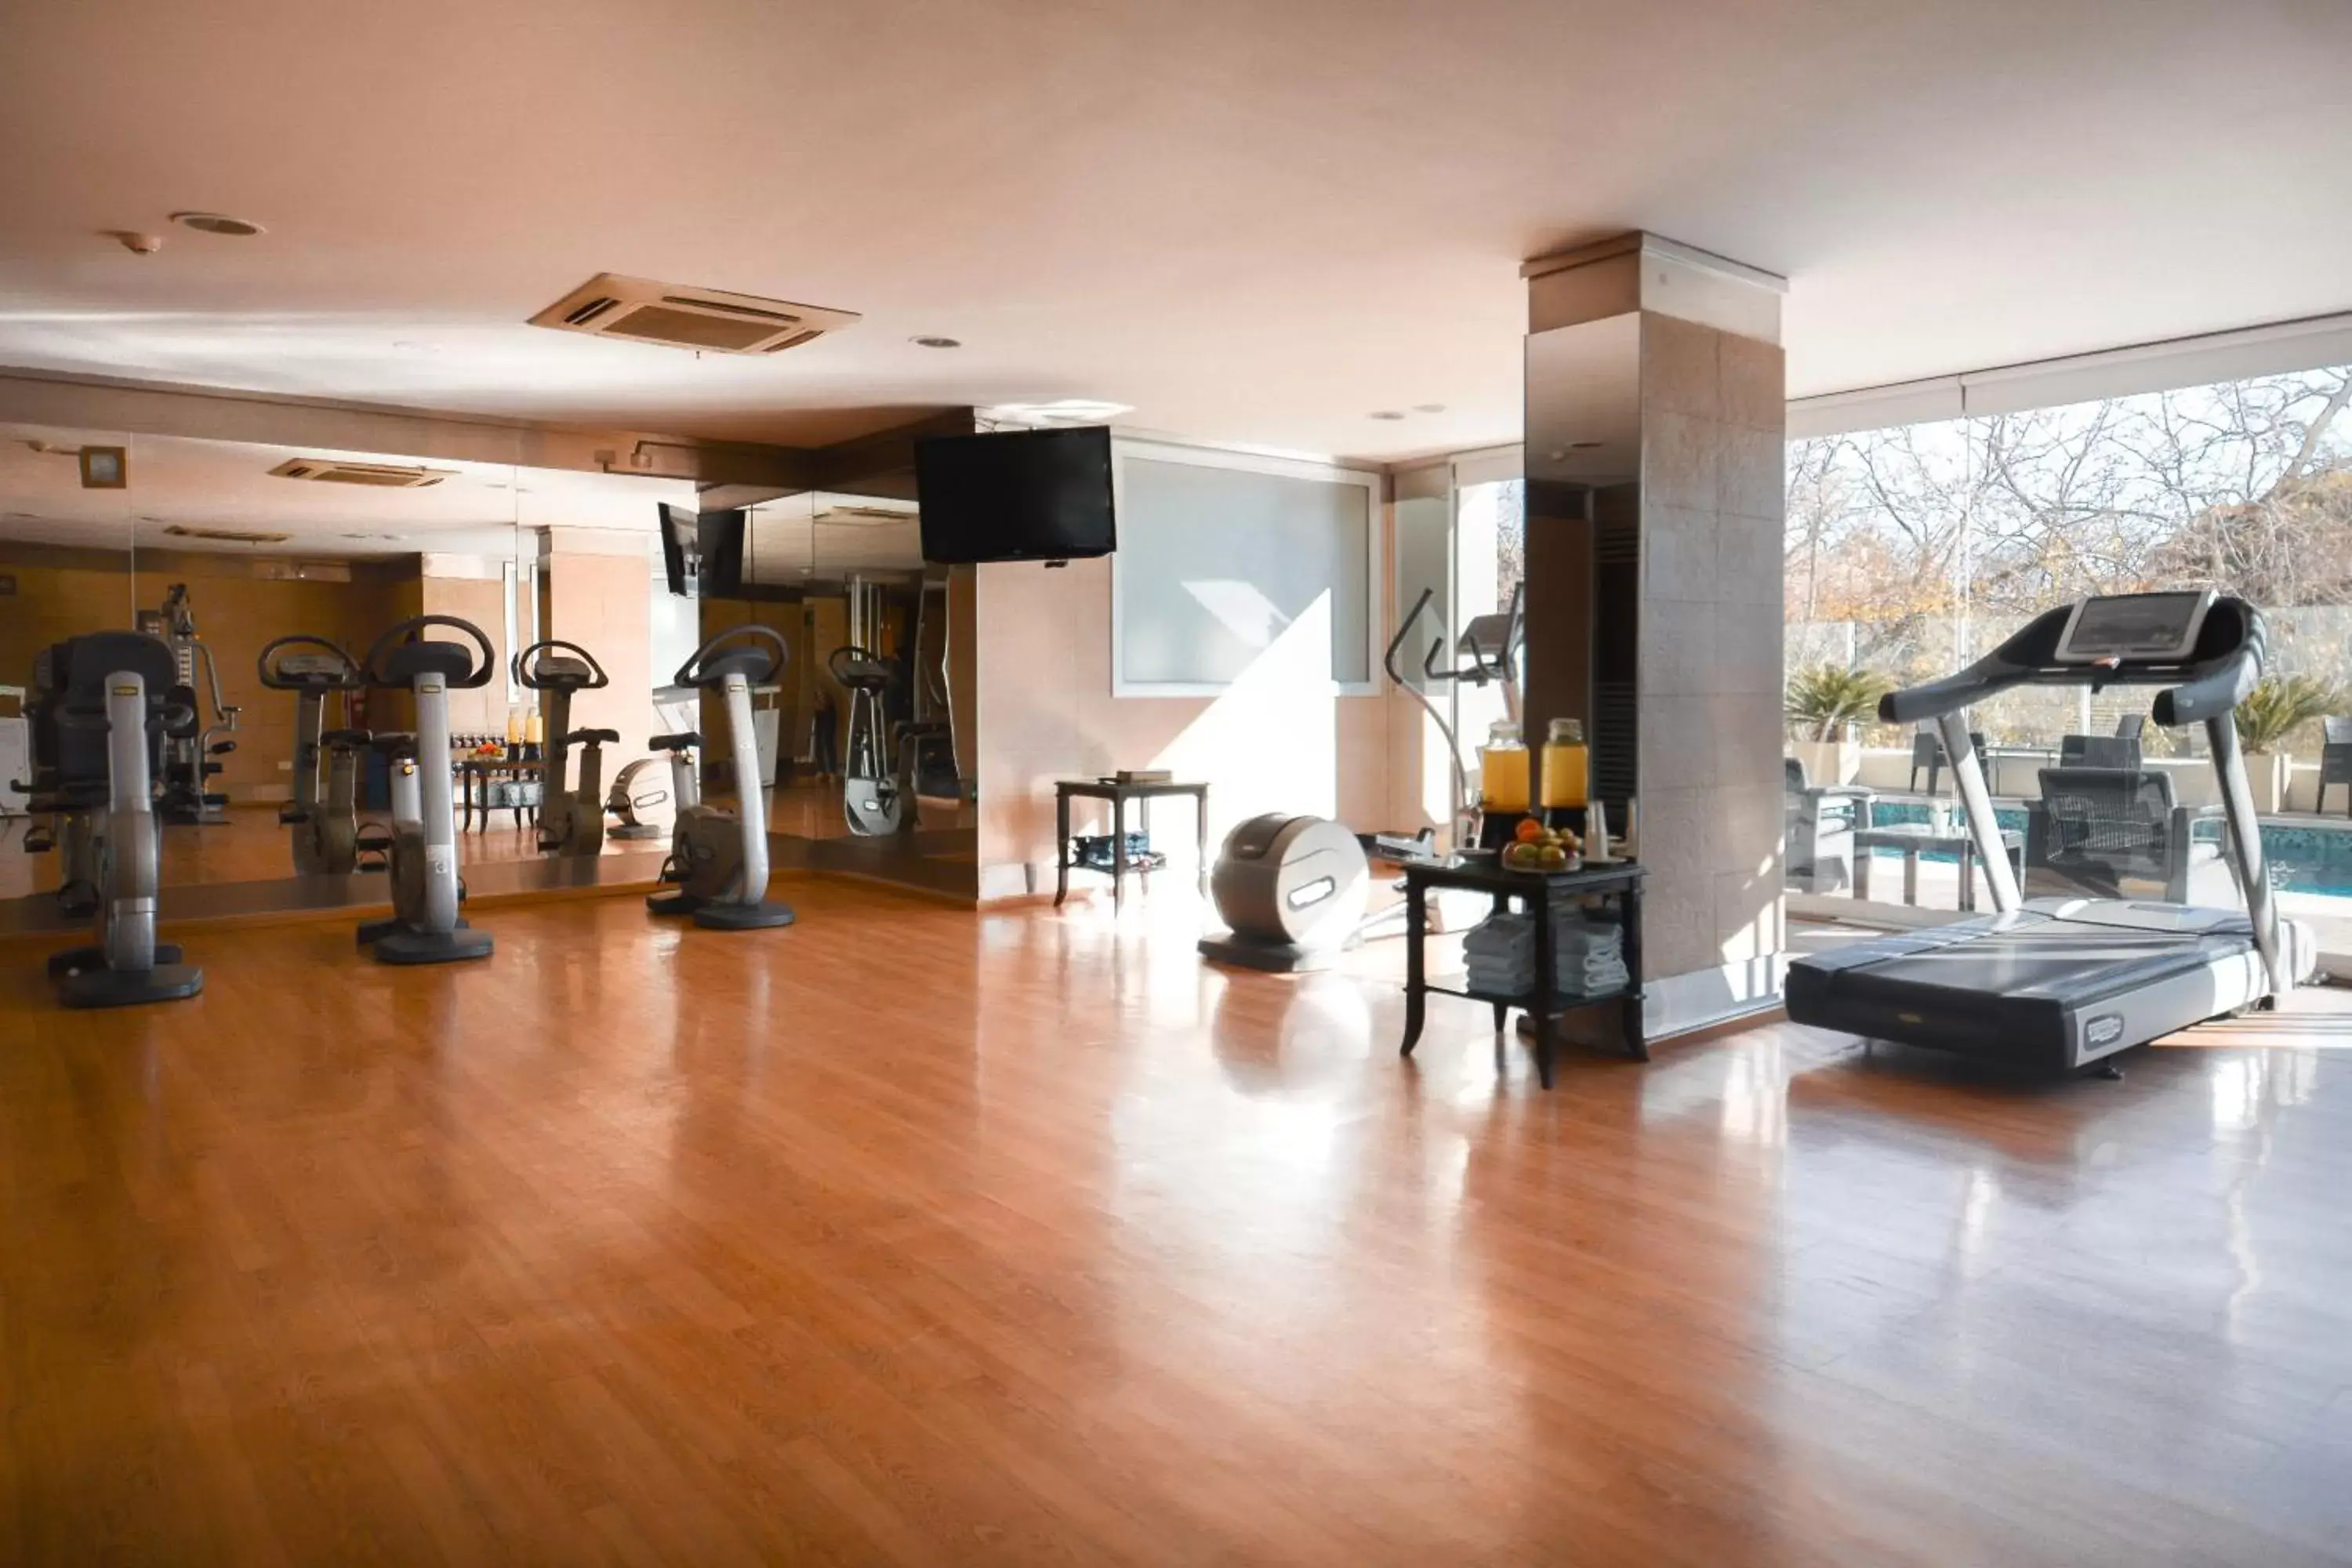 Fitness centre/facilities, Fitness Center/Facilities in DiplomaticHotel